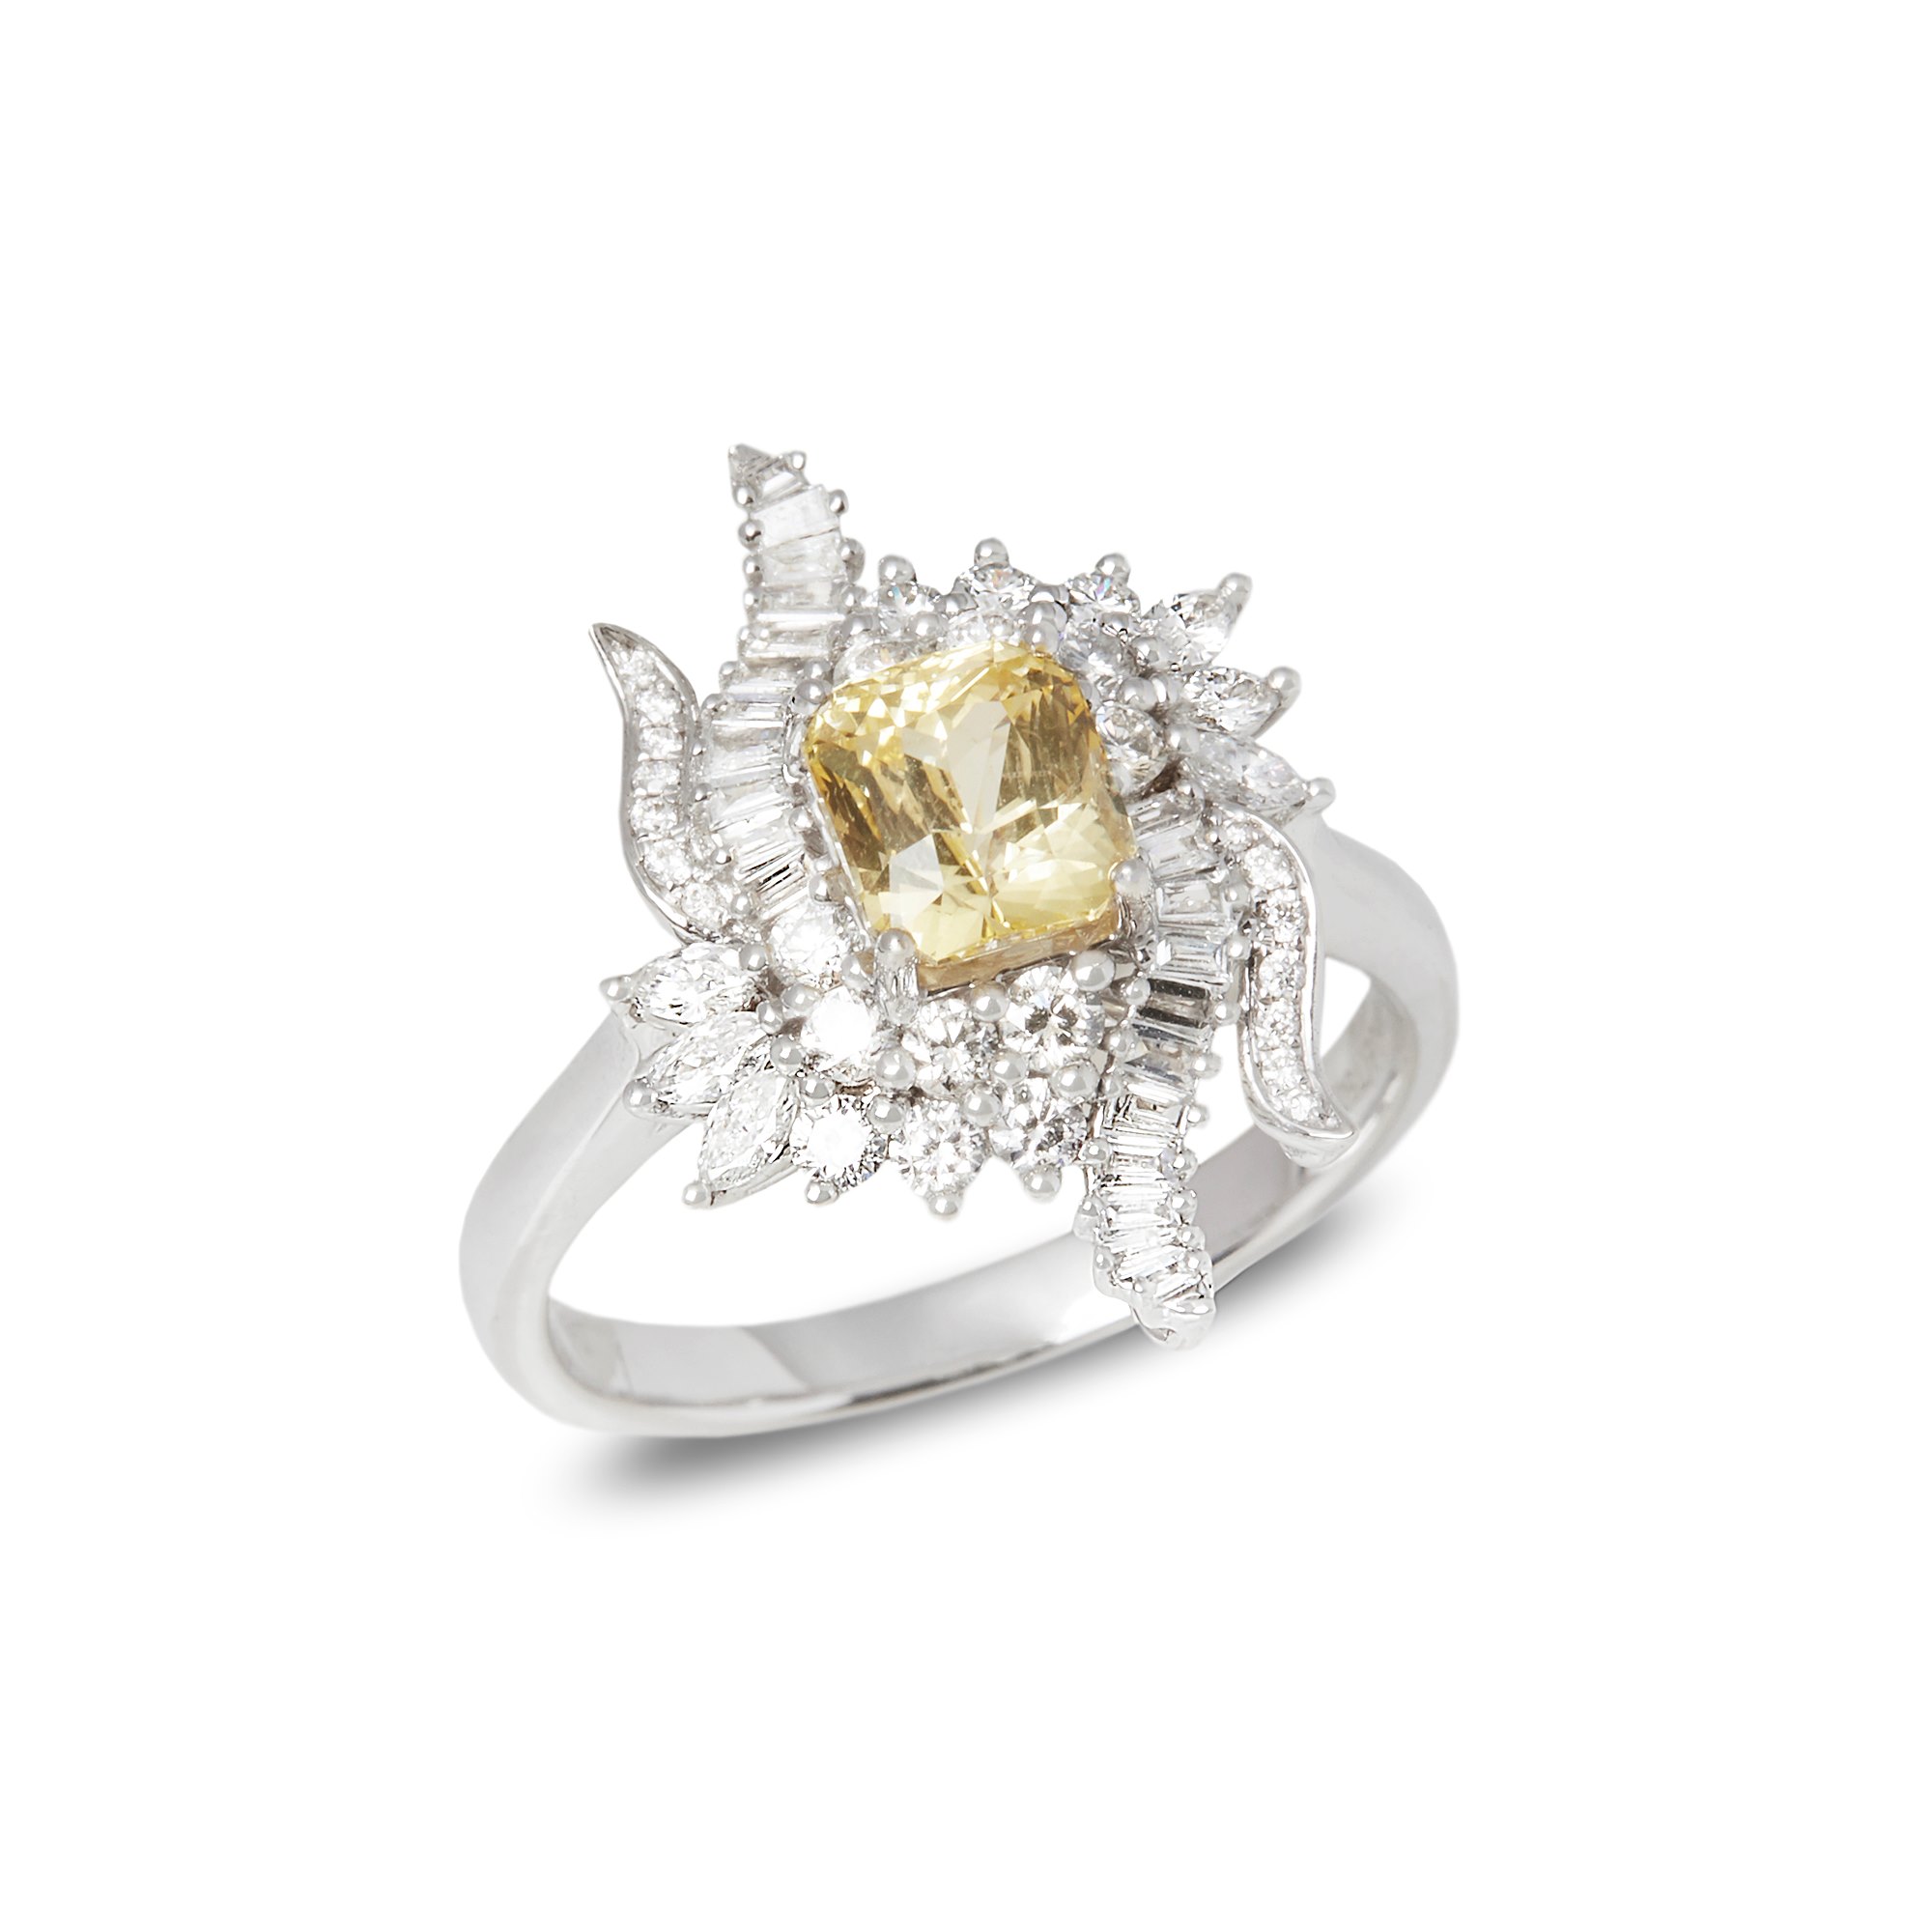 David Jerome Certified 1.57ct Octagon Cut Unheated Yellow Sapphire and Diamond 18ct Gold Ring